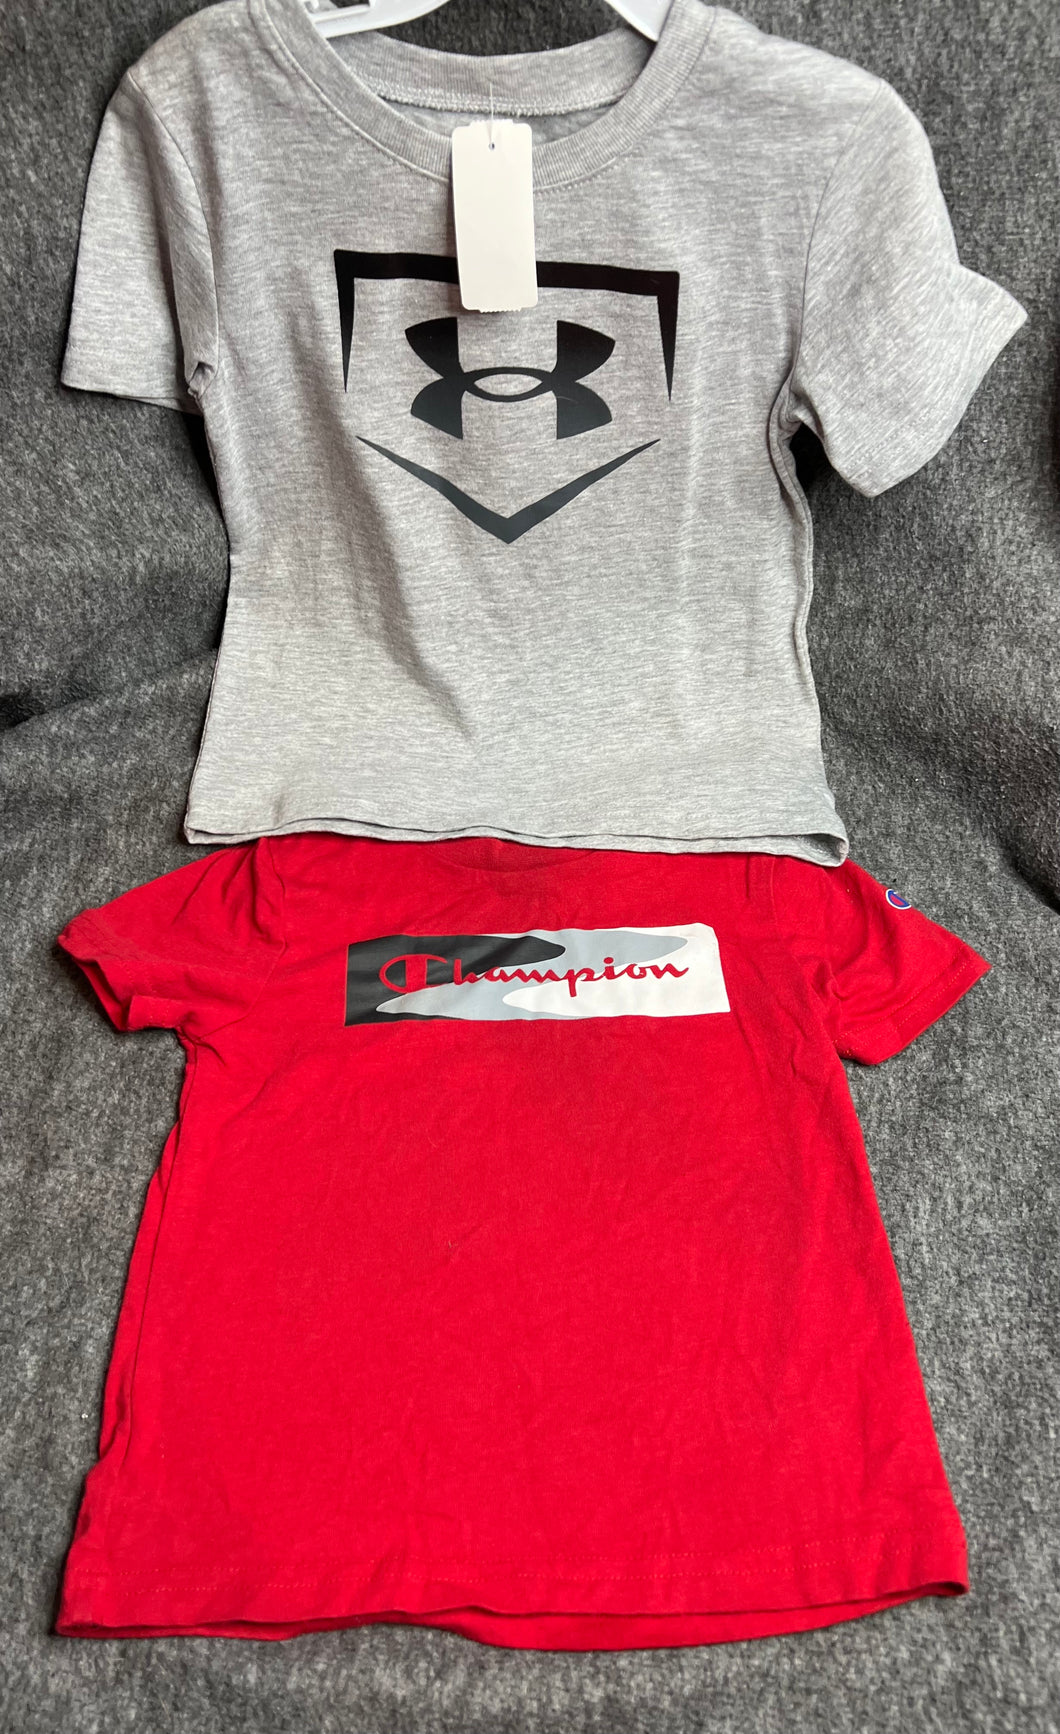 NWT 2 T-Shirts from Under Armour and Champion 4